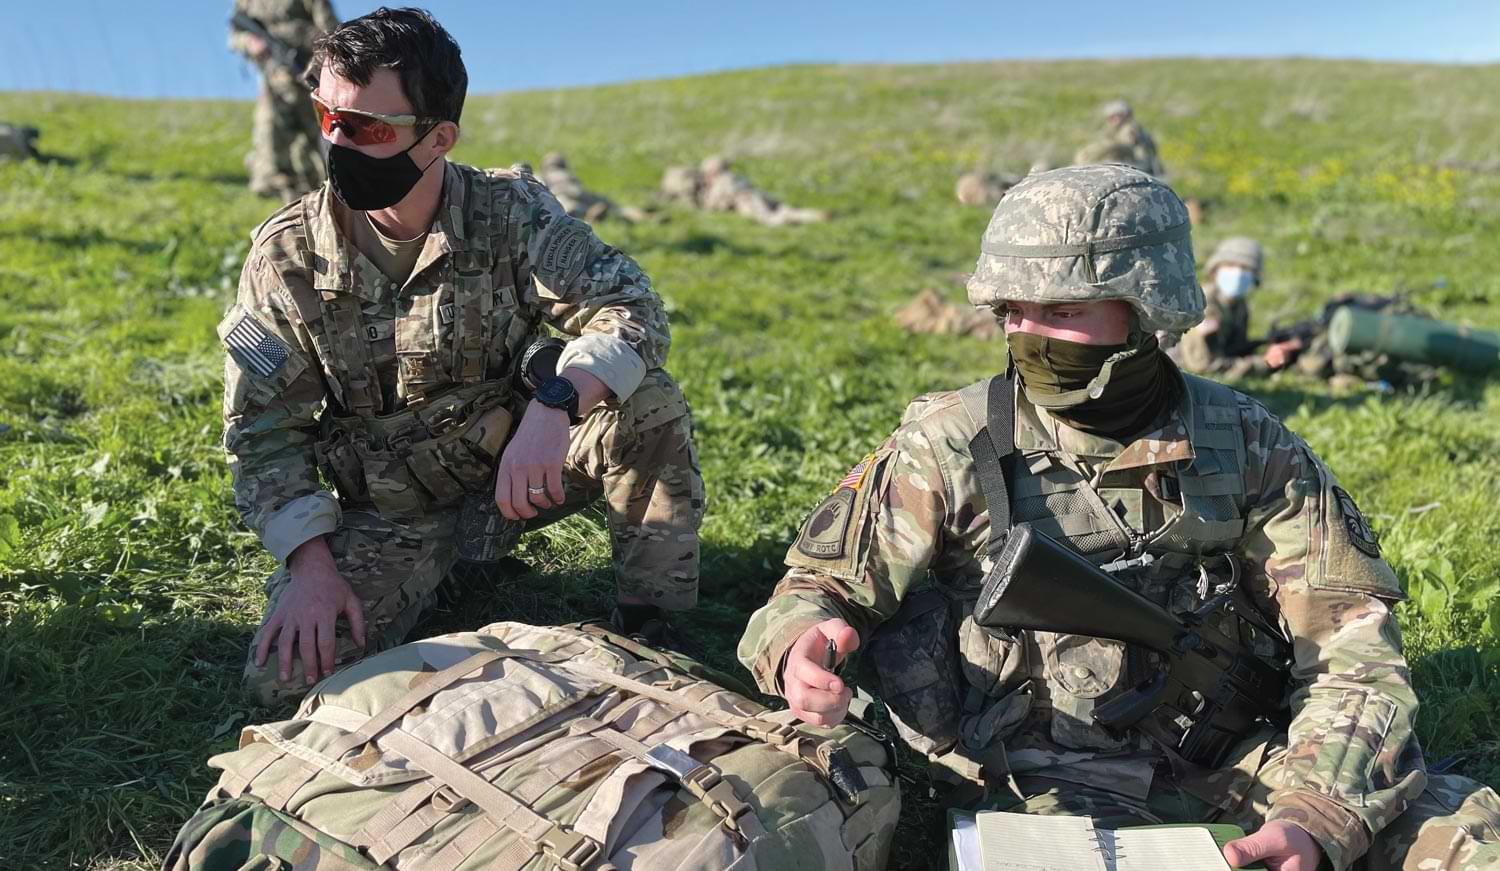 two ROTC cadets wearing full camouflage and sittin on a grassy hill